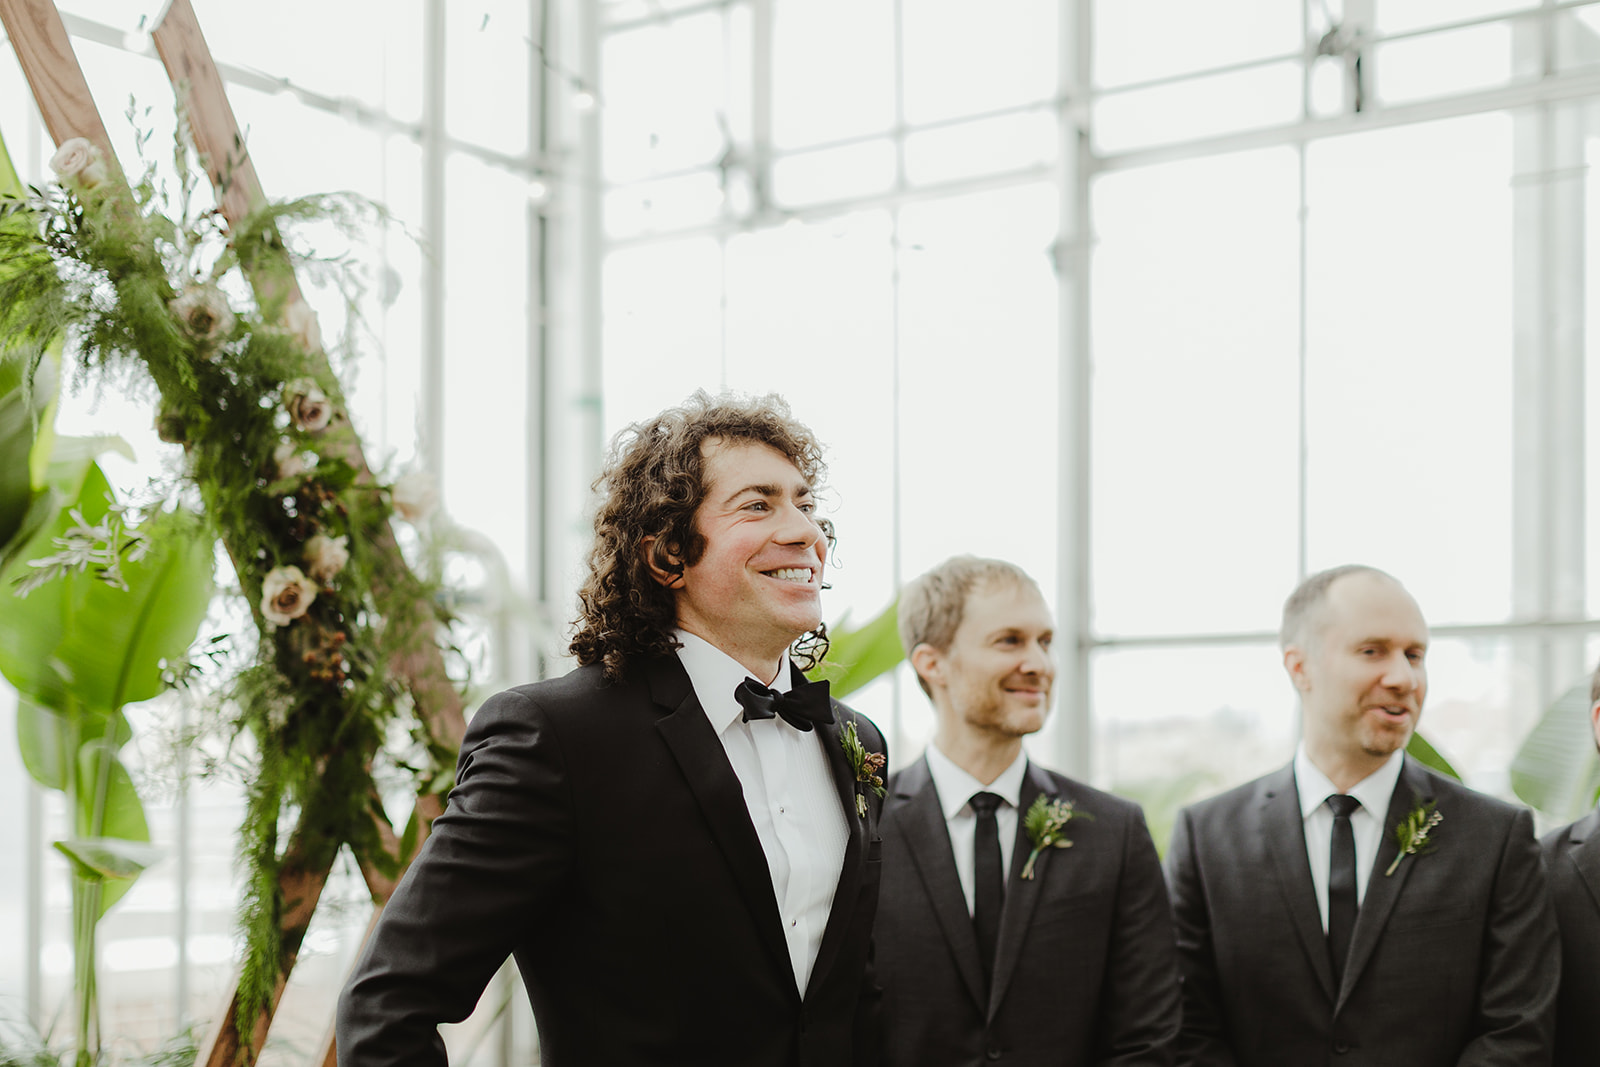 A groom smiling as his bride walks down the aisle